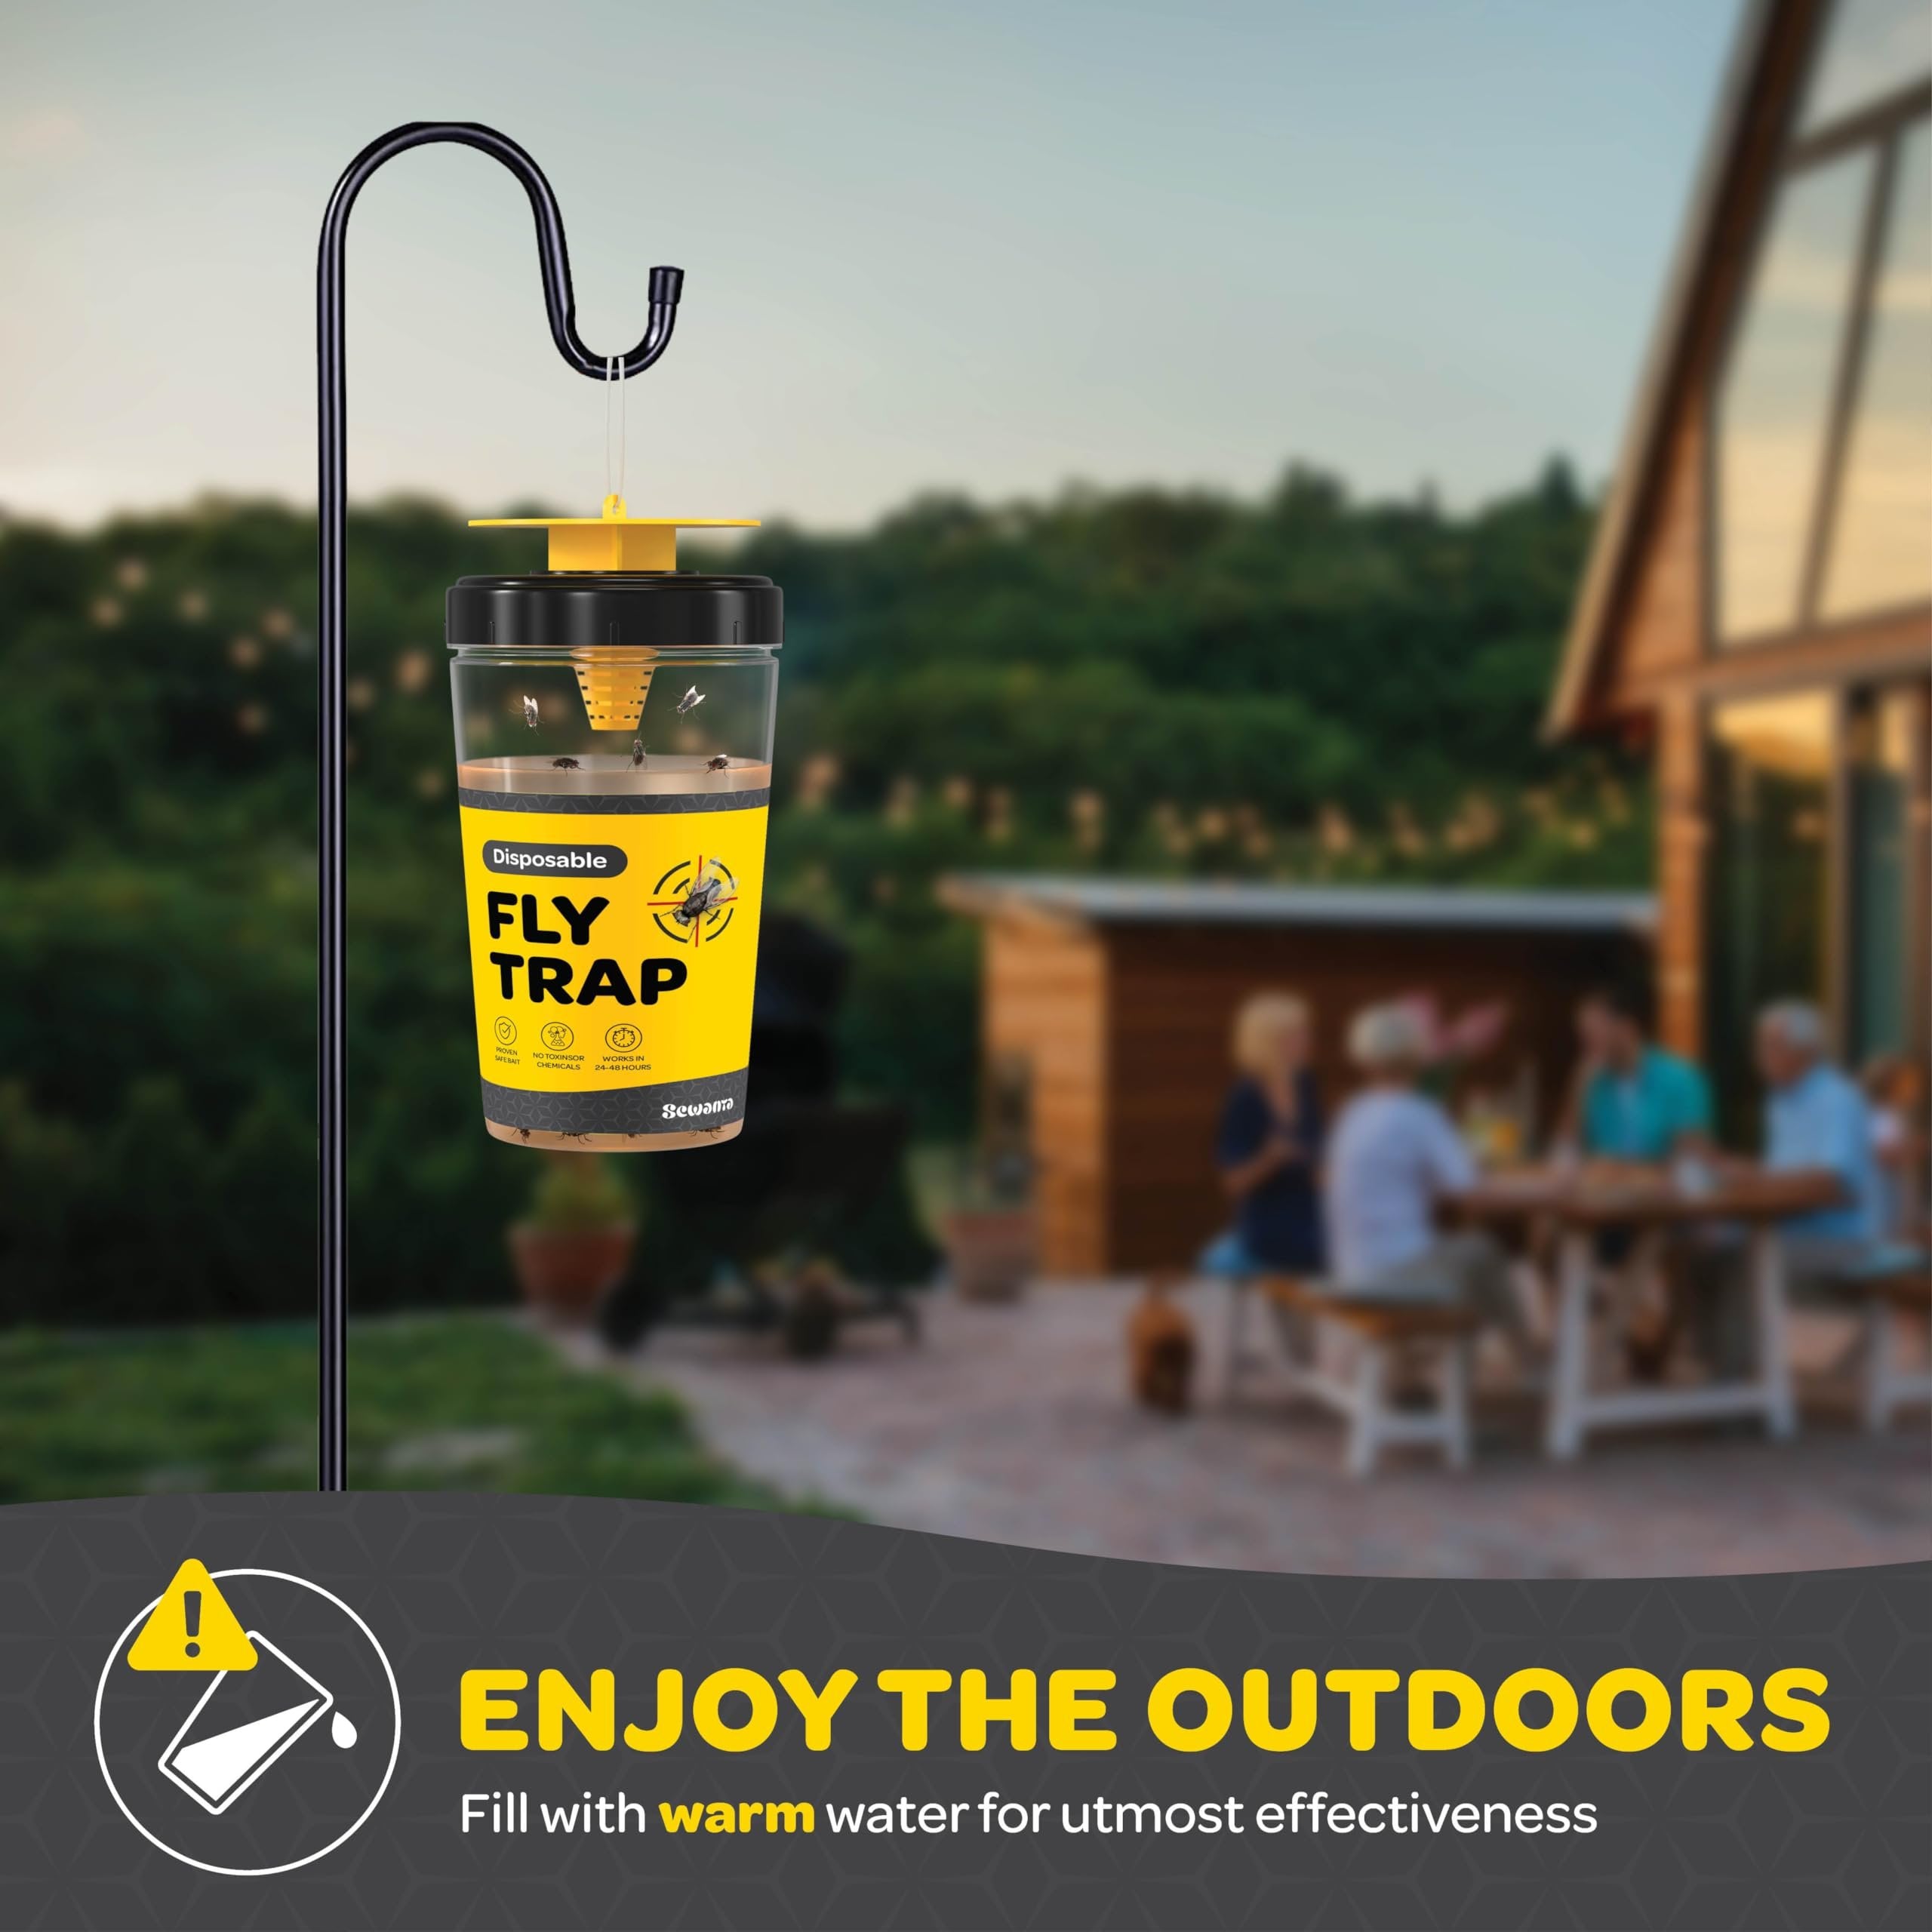 Outdoor Fly Trap [Set of 3] Fly Traps Outdoor with Dissolvable Non-Toxic Bait - Fly Repellent for Outdoor Use Only - Controls Flies for Patios, Barns, Ranches Etc. Hanging Fly Traps with Tie Included